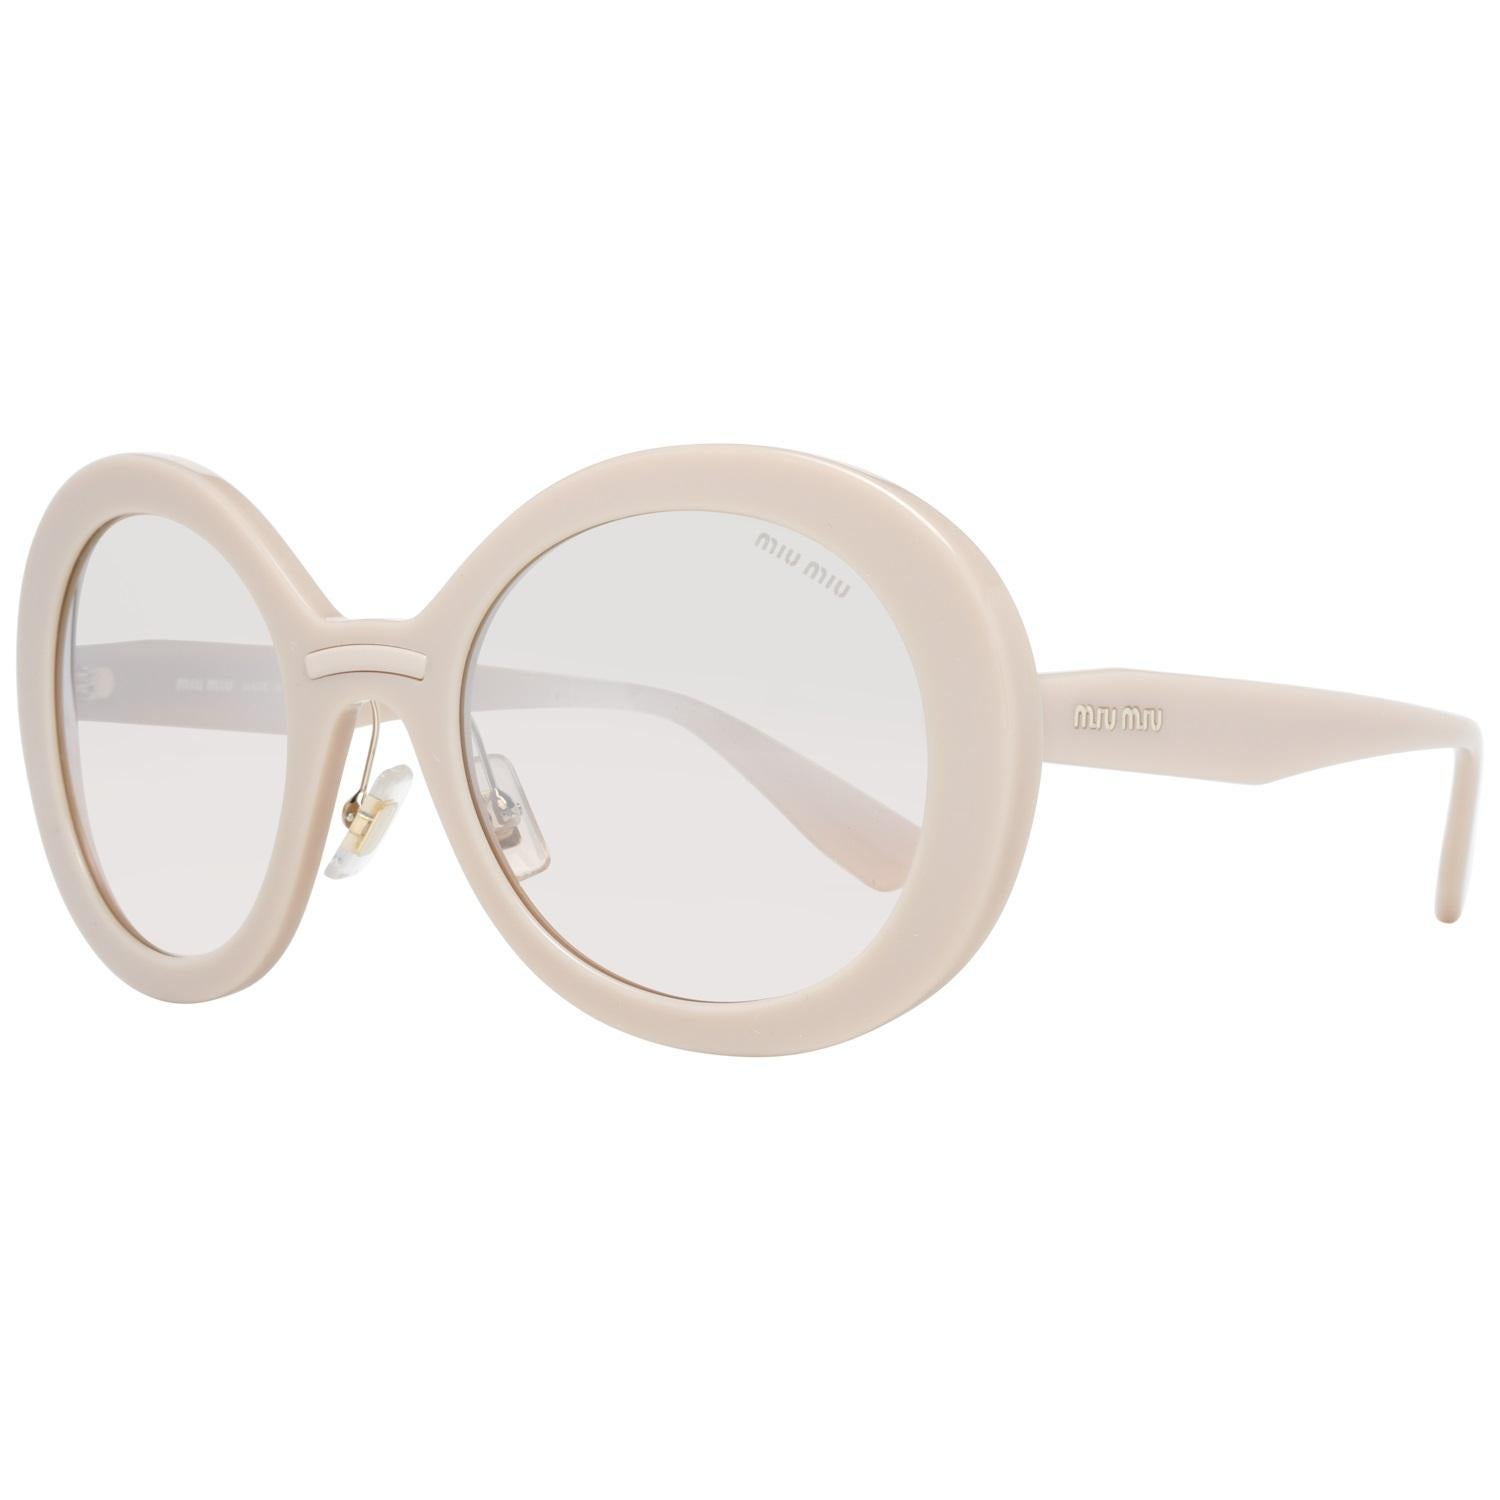 Details
MATERIAL: Acetate
COLOR: 
MODEL: MU04VS 53158204
GENDER: Women
COUNTRY OF MANUFACTURE: Italy
TYPE: Sunglasses
ORIGINAL CASE?: Yes
STYLE: Oval
OCCASION: Casual
FEATURES: Lightweight
LENS COLOR: Brown
LENS TECHNOLOGY: Mirrored
YEAR